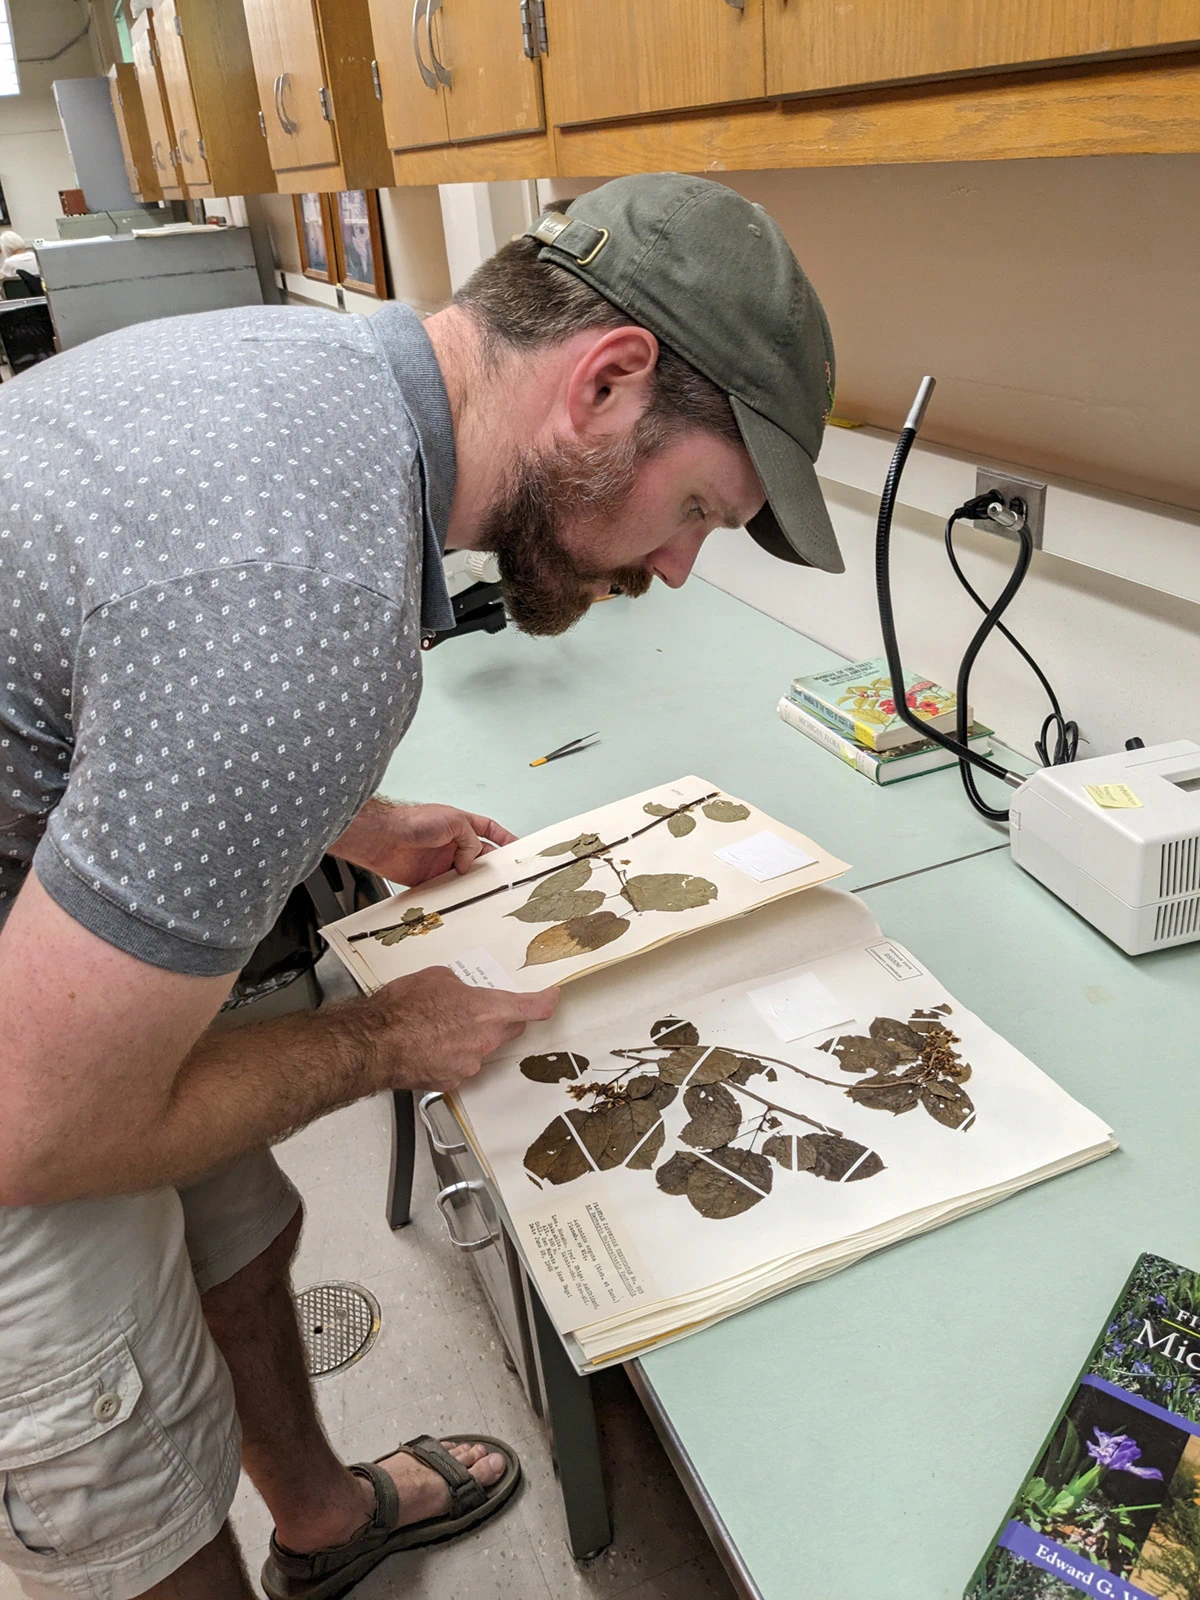 Matt Chansler looks at herbarium specimens: leaves and stems affixed to large pages with thin white restraints. Small text at the bottom of the page (that’s illegible in the photo) contains details about the specimens.